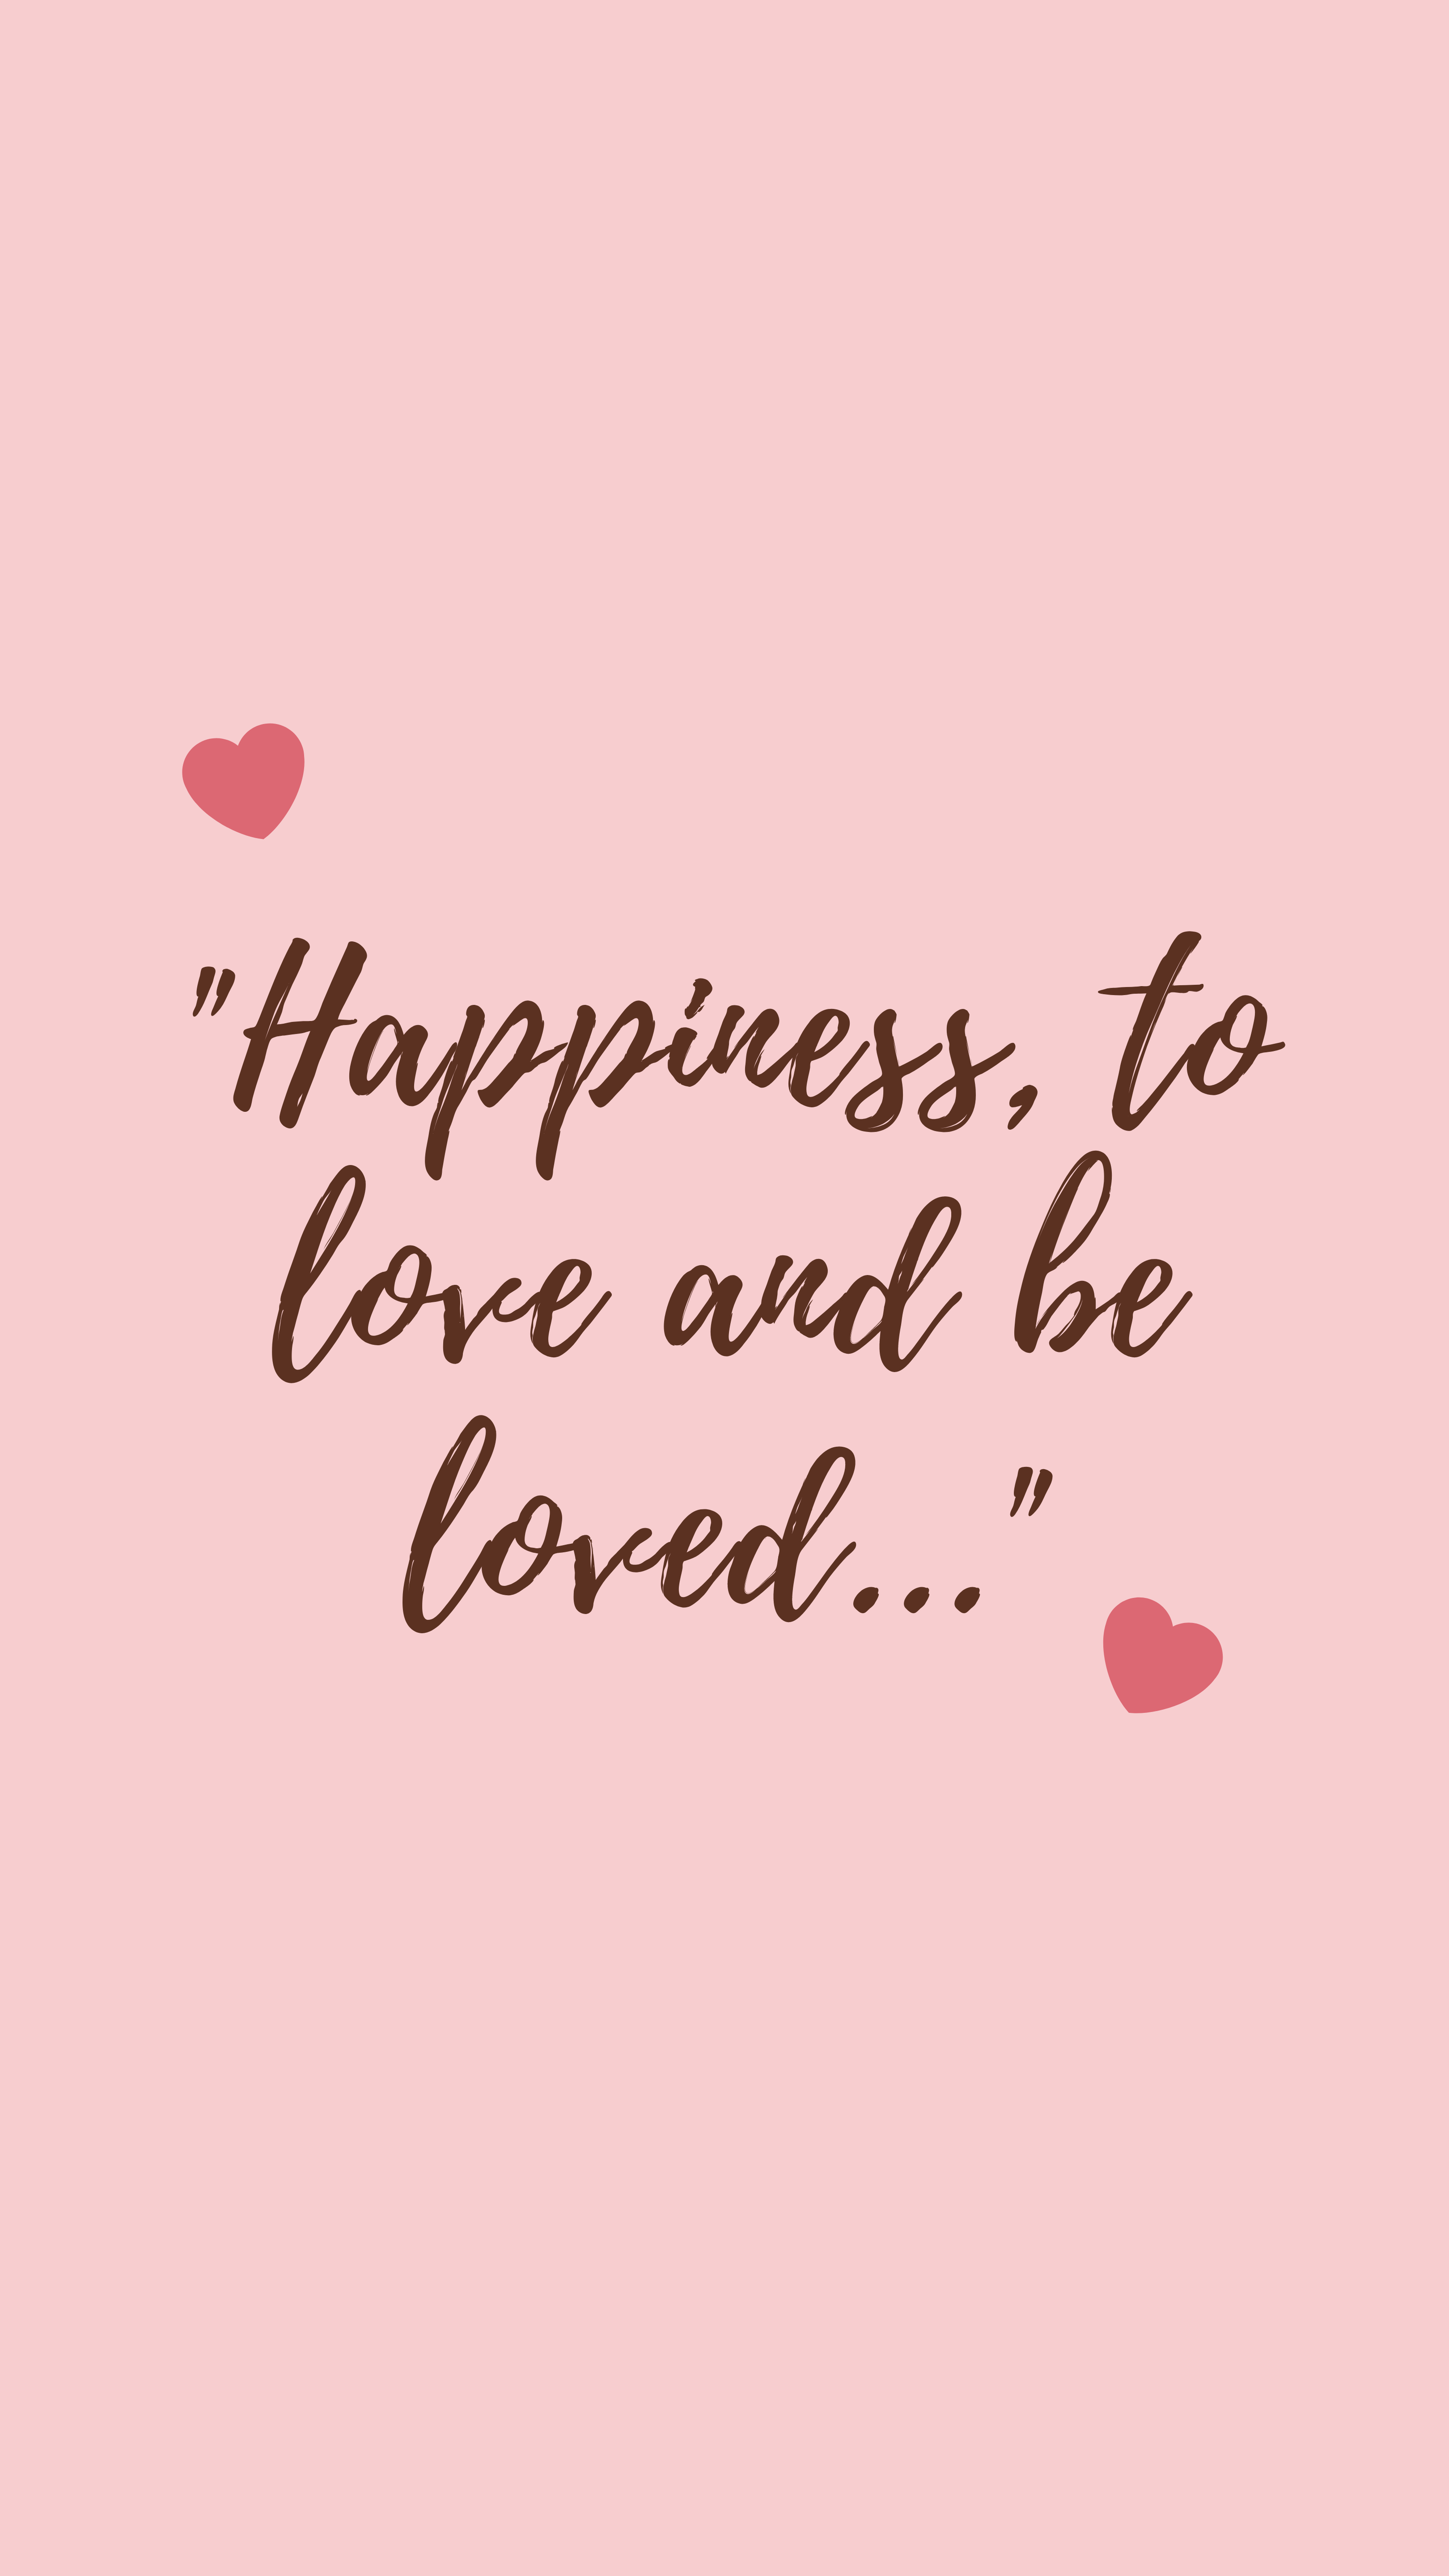 happiness, quotation, quote, love, words, phrase, feelings